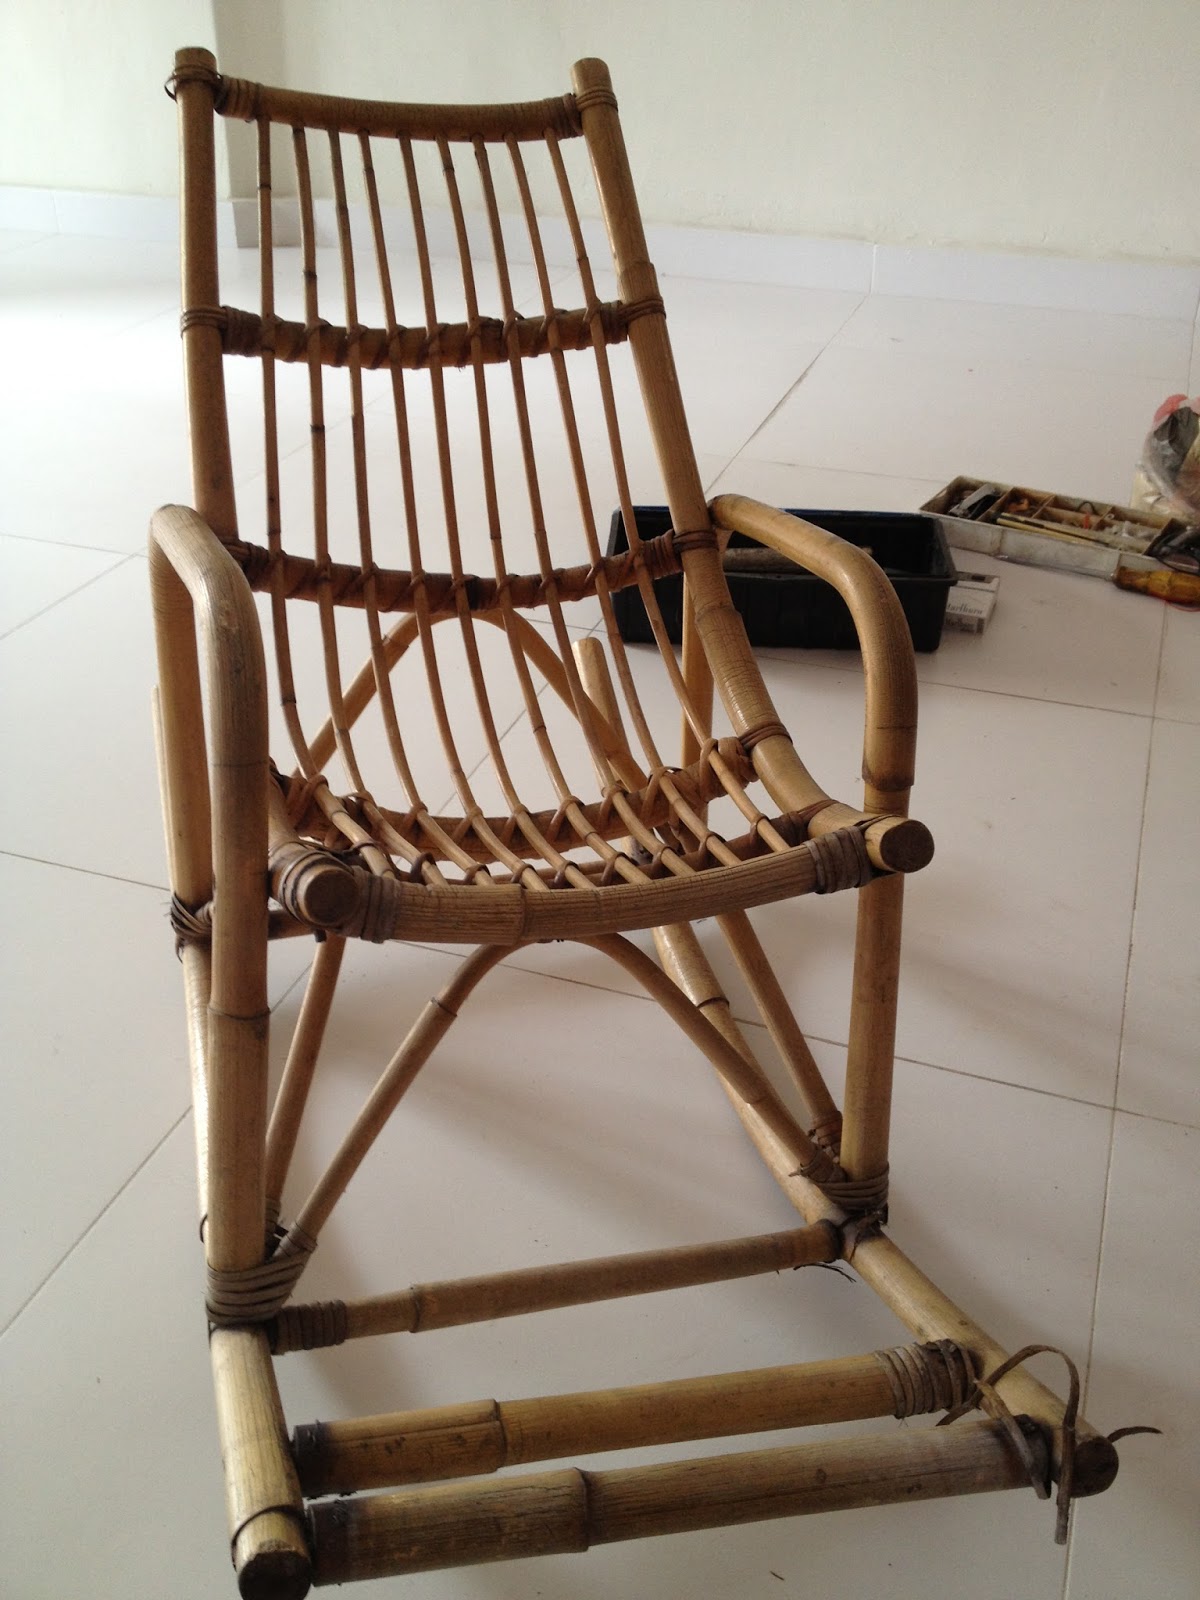 Our Renovation Adventures: Baby Rocking Chair